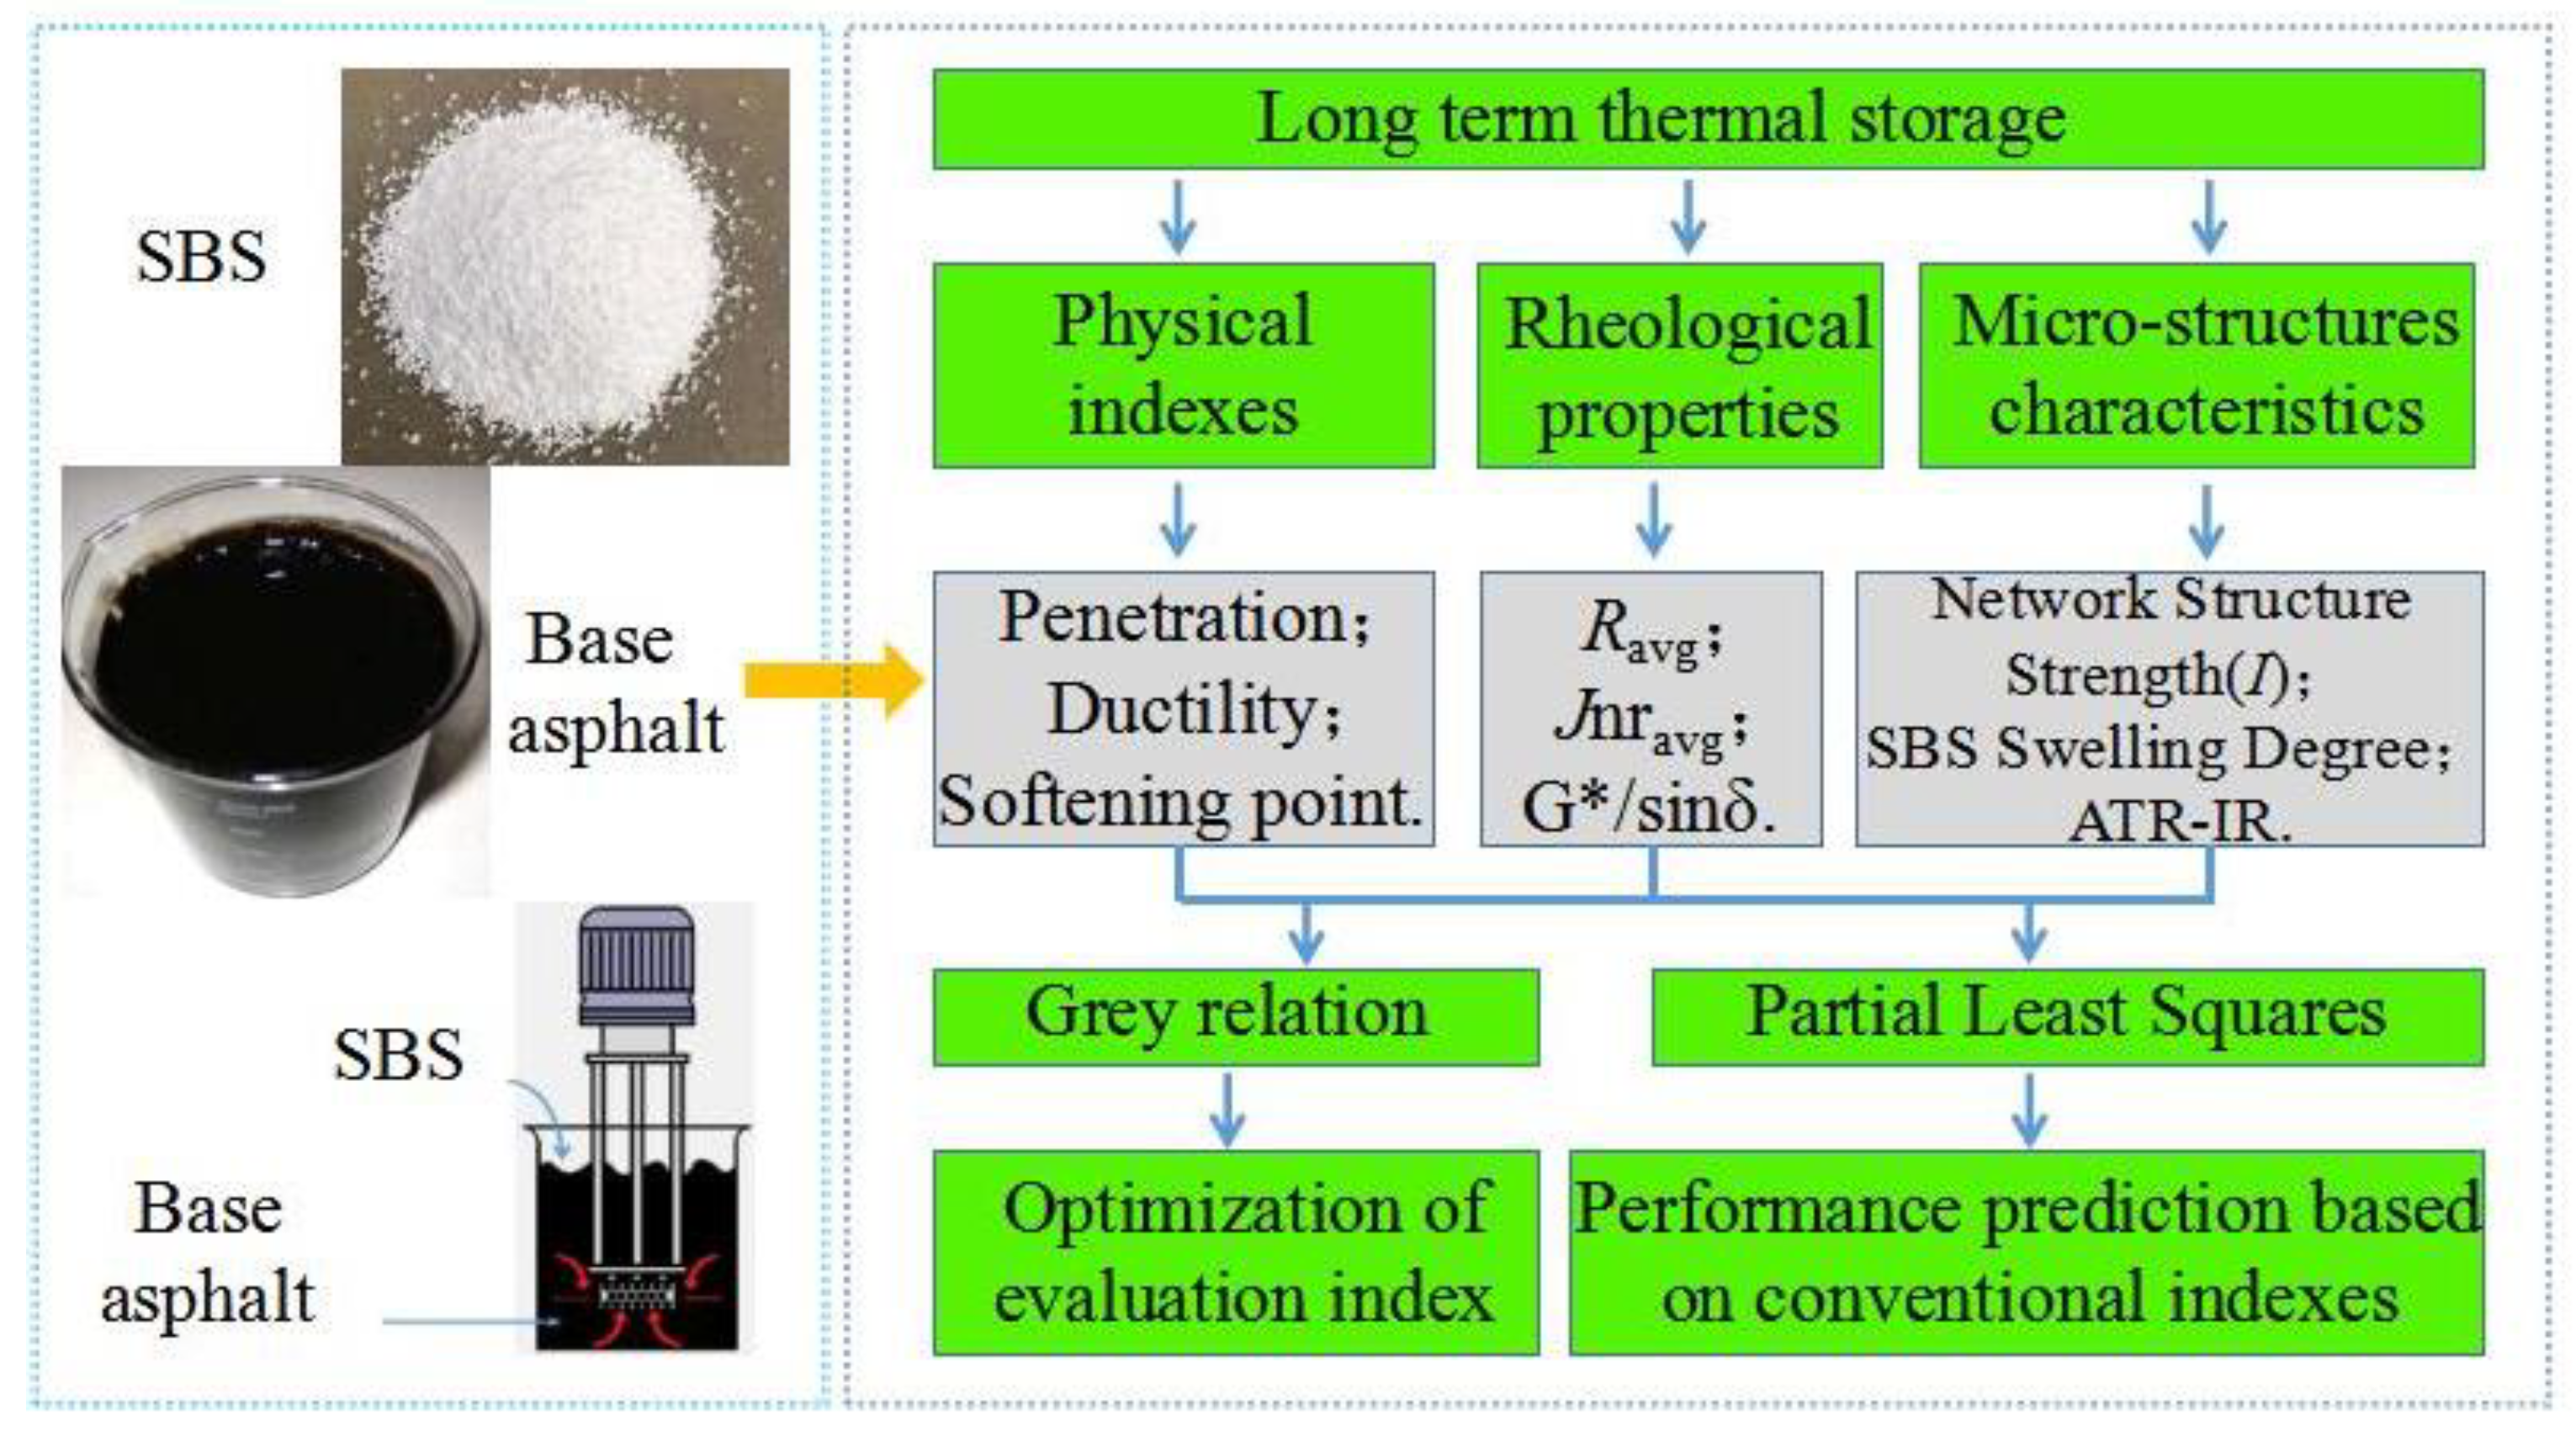 Sustainability Free Full Text Identifying The Long Term Thermal Storage Stability Of Sbs Polymer Modified Asphalt Including Physical Indexes Rheological Properties And Micro Structures Characteristics Html